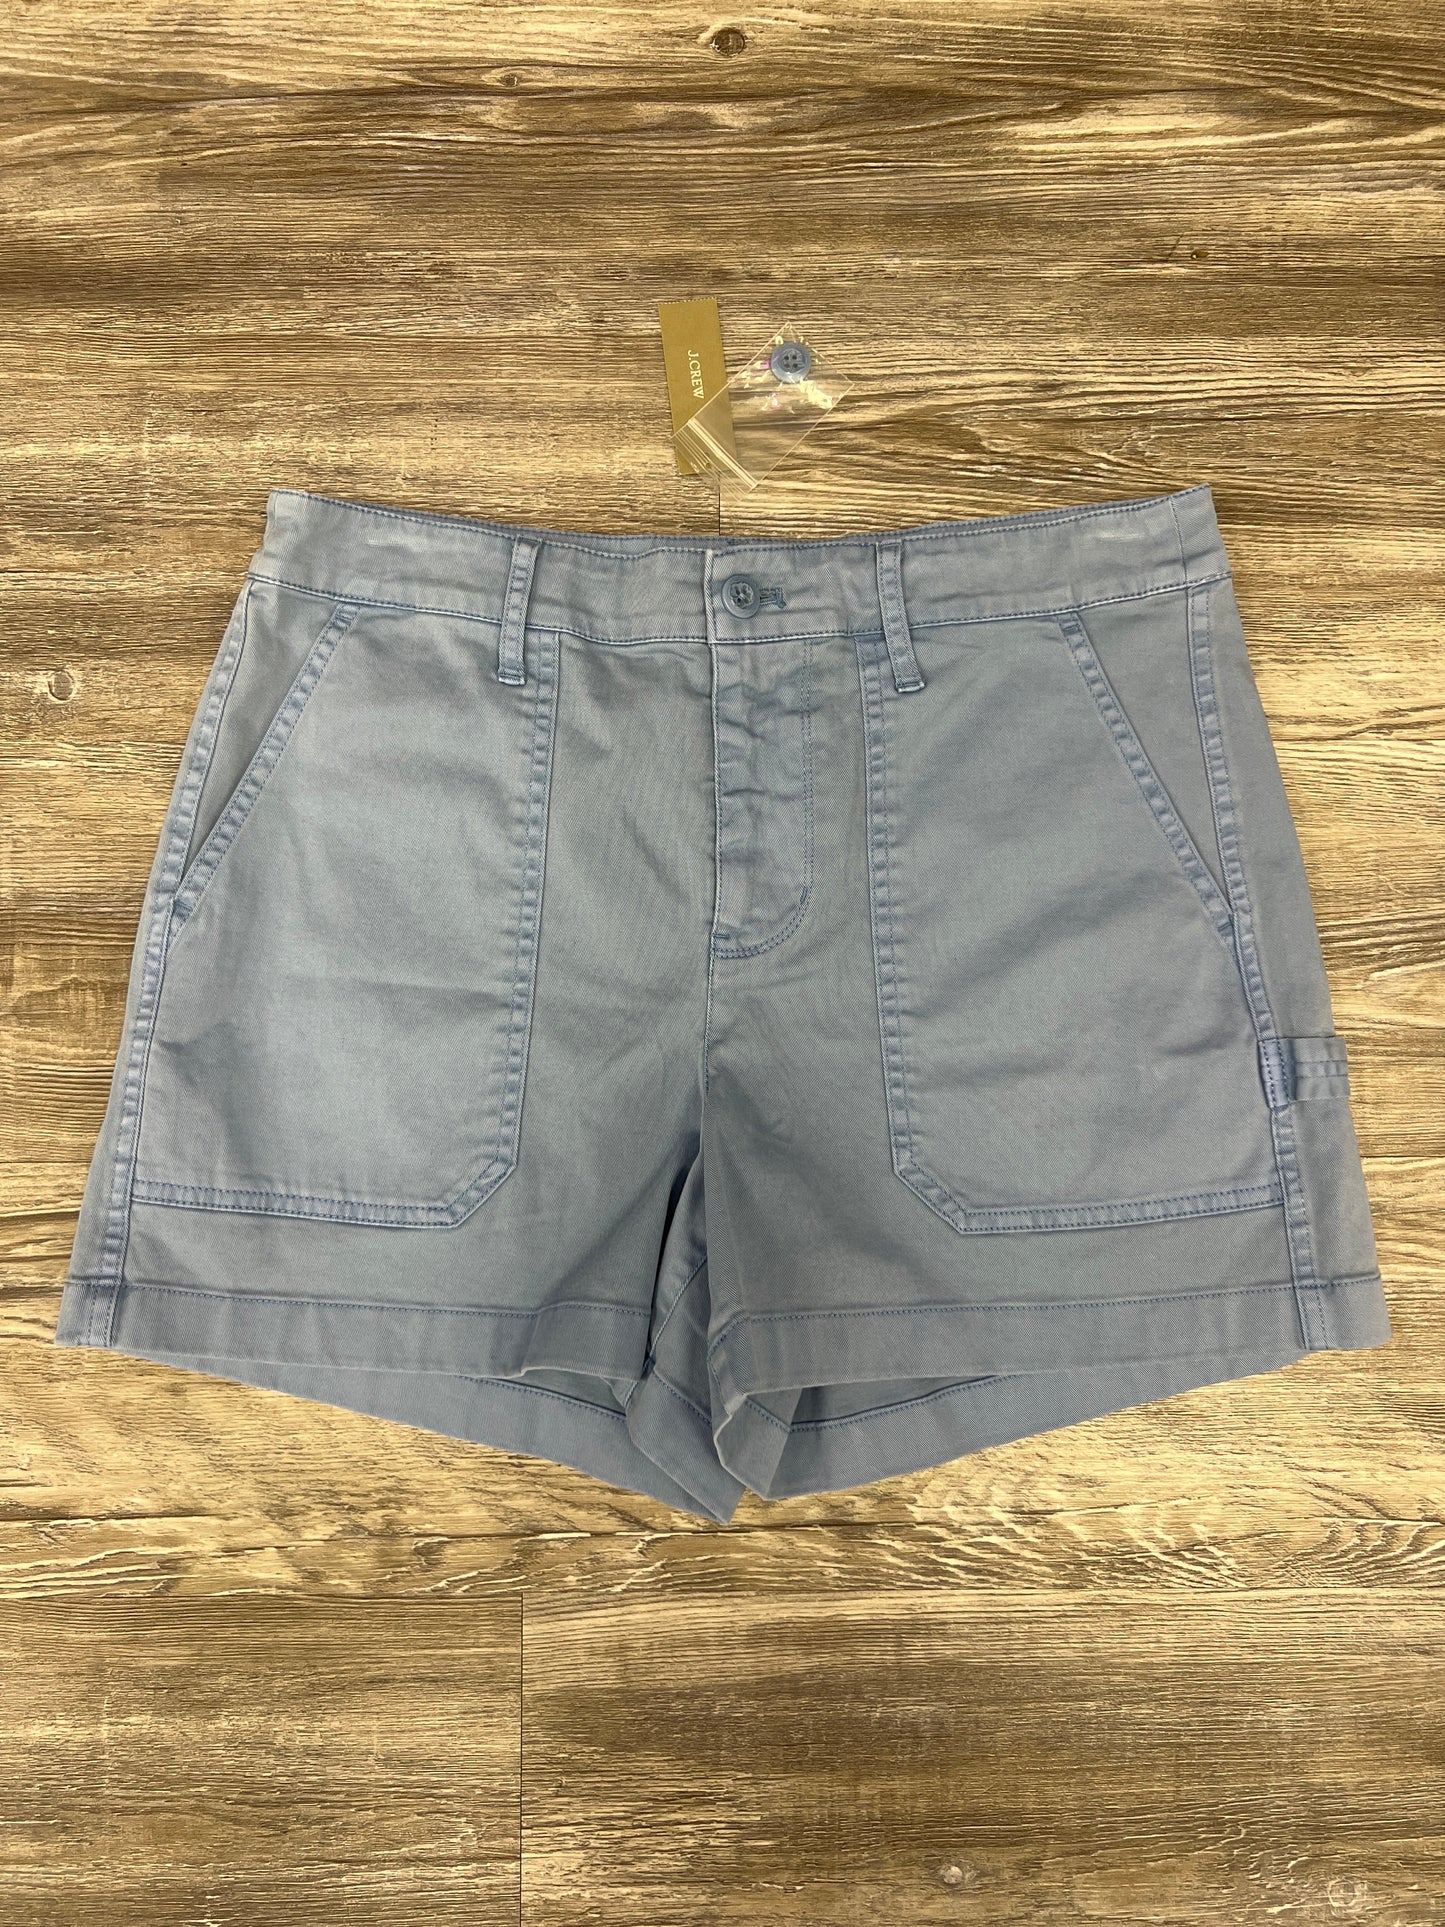 Shorts By J Crew Size: 10